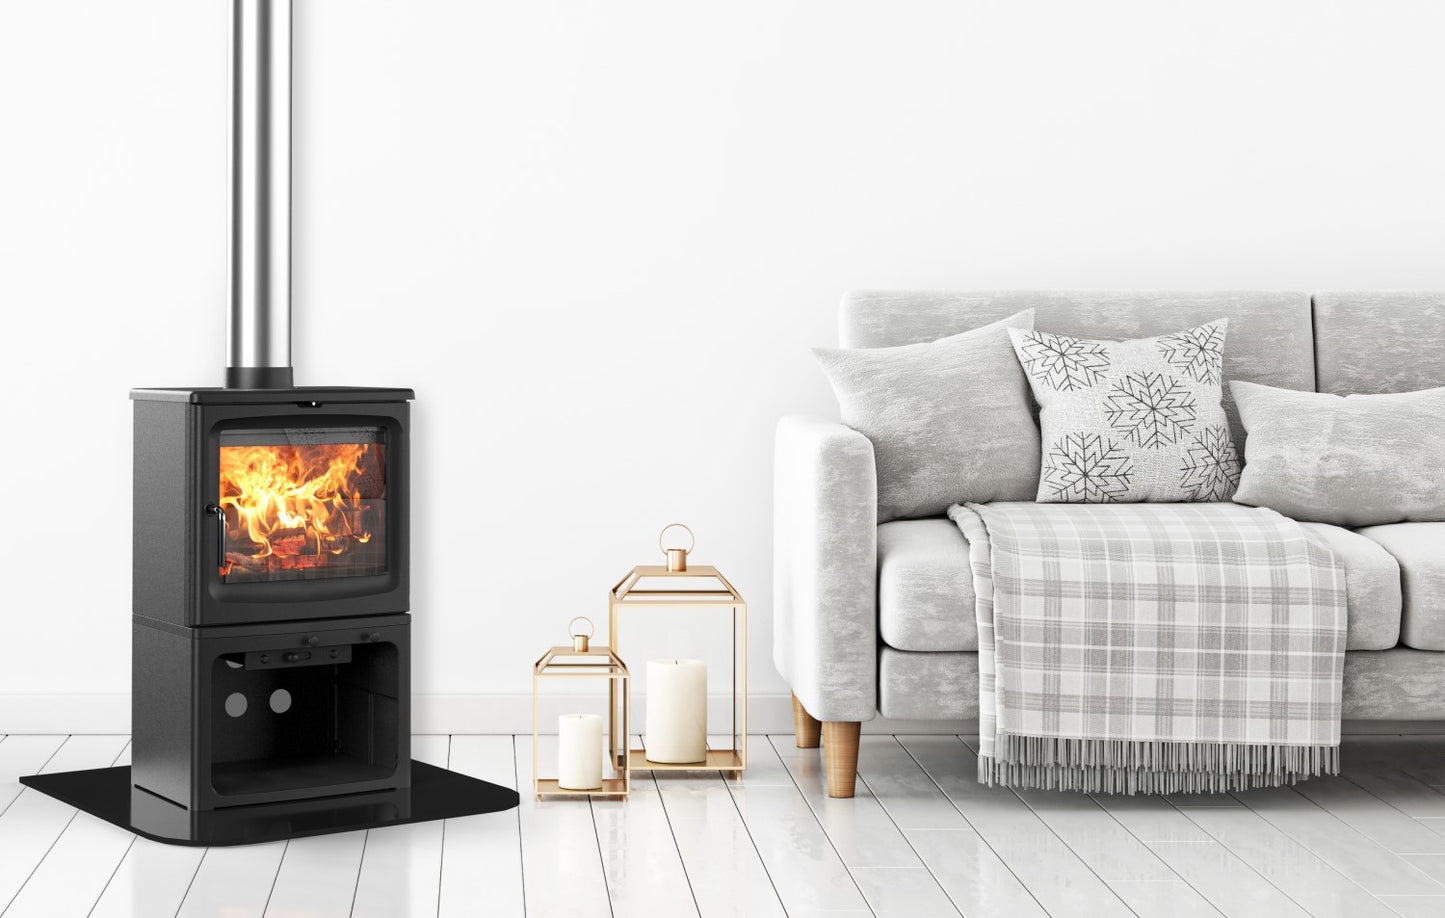 Iron cast woodburning stove - Saltfire Peanut 8KW Tall is a stylish addition to any home.